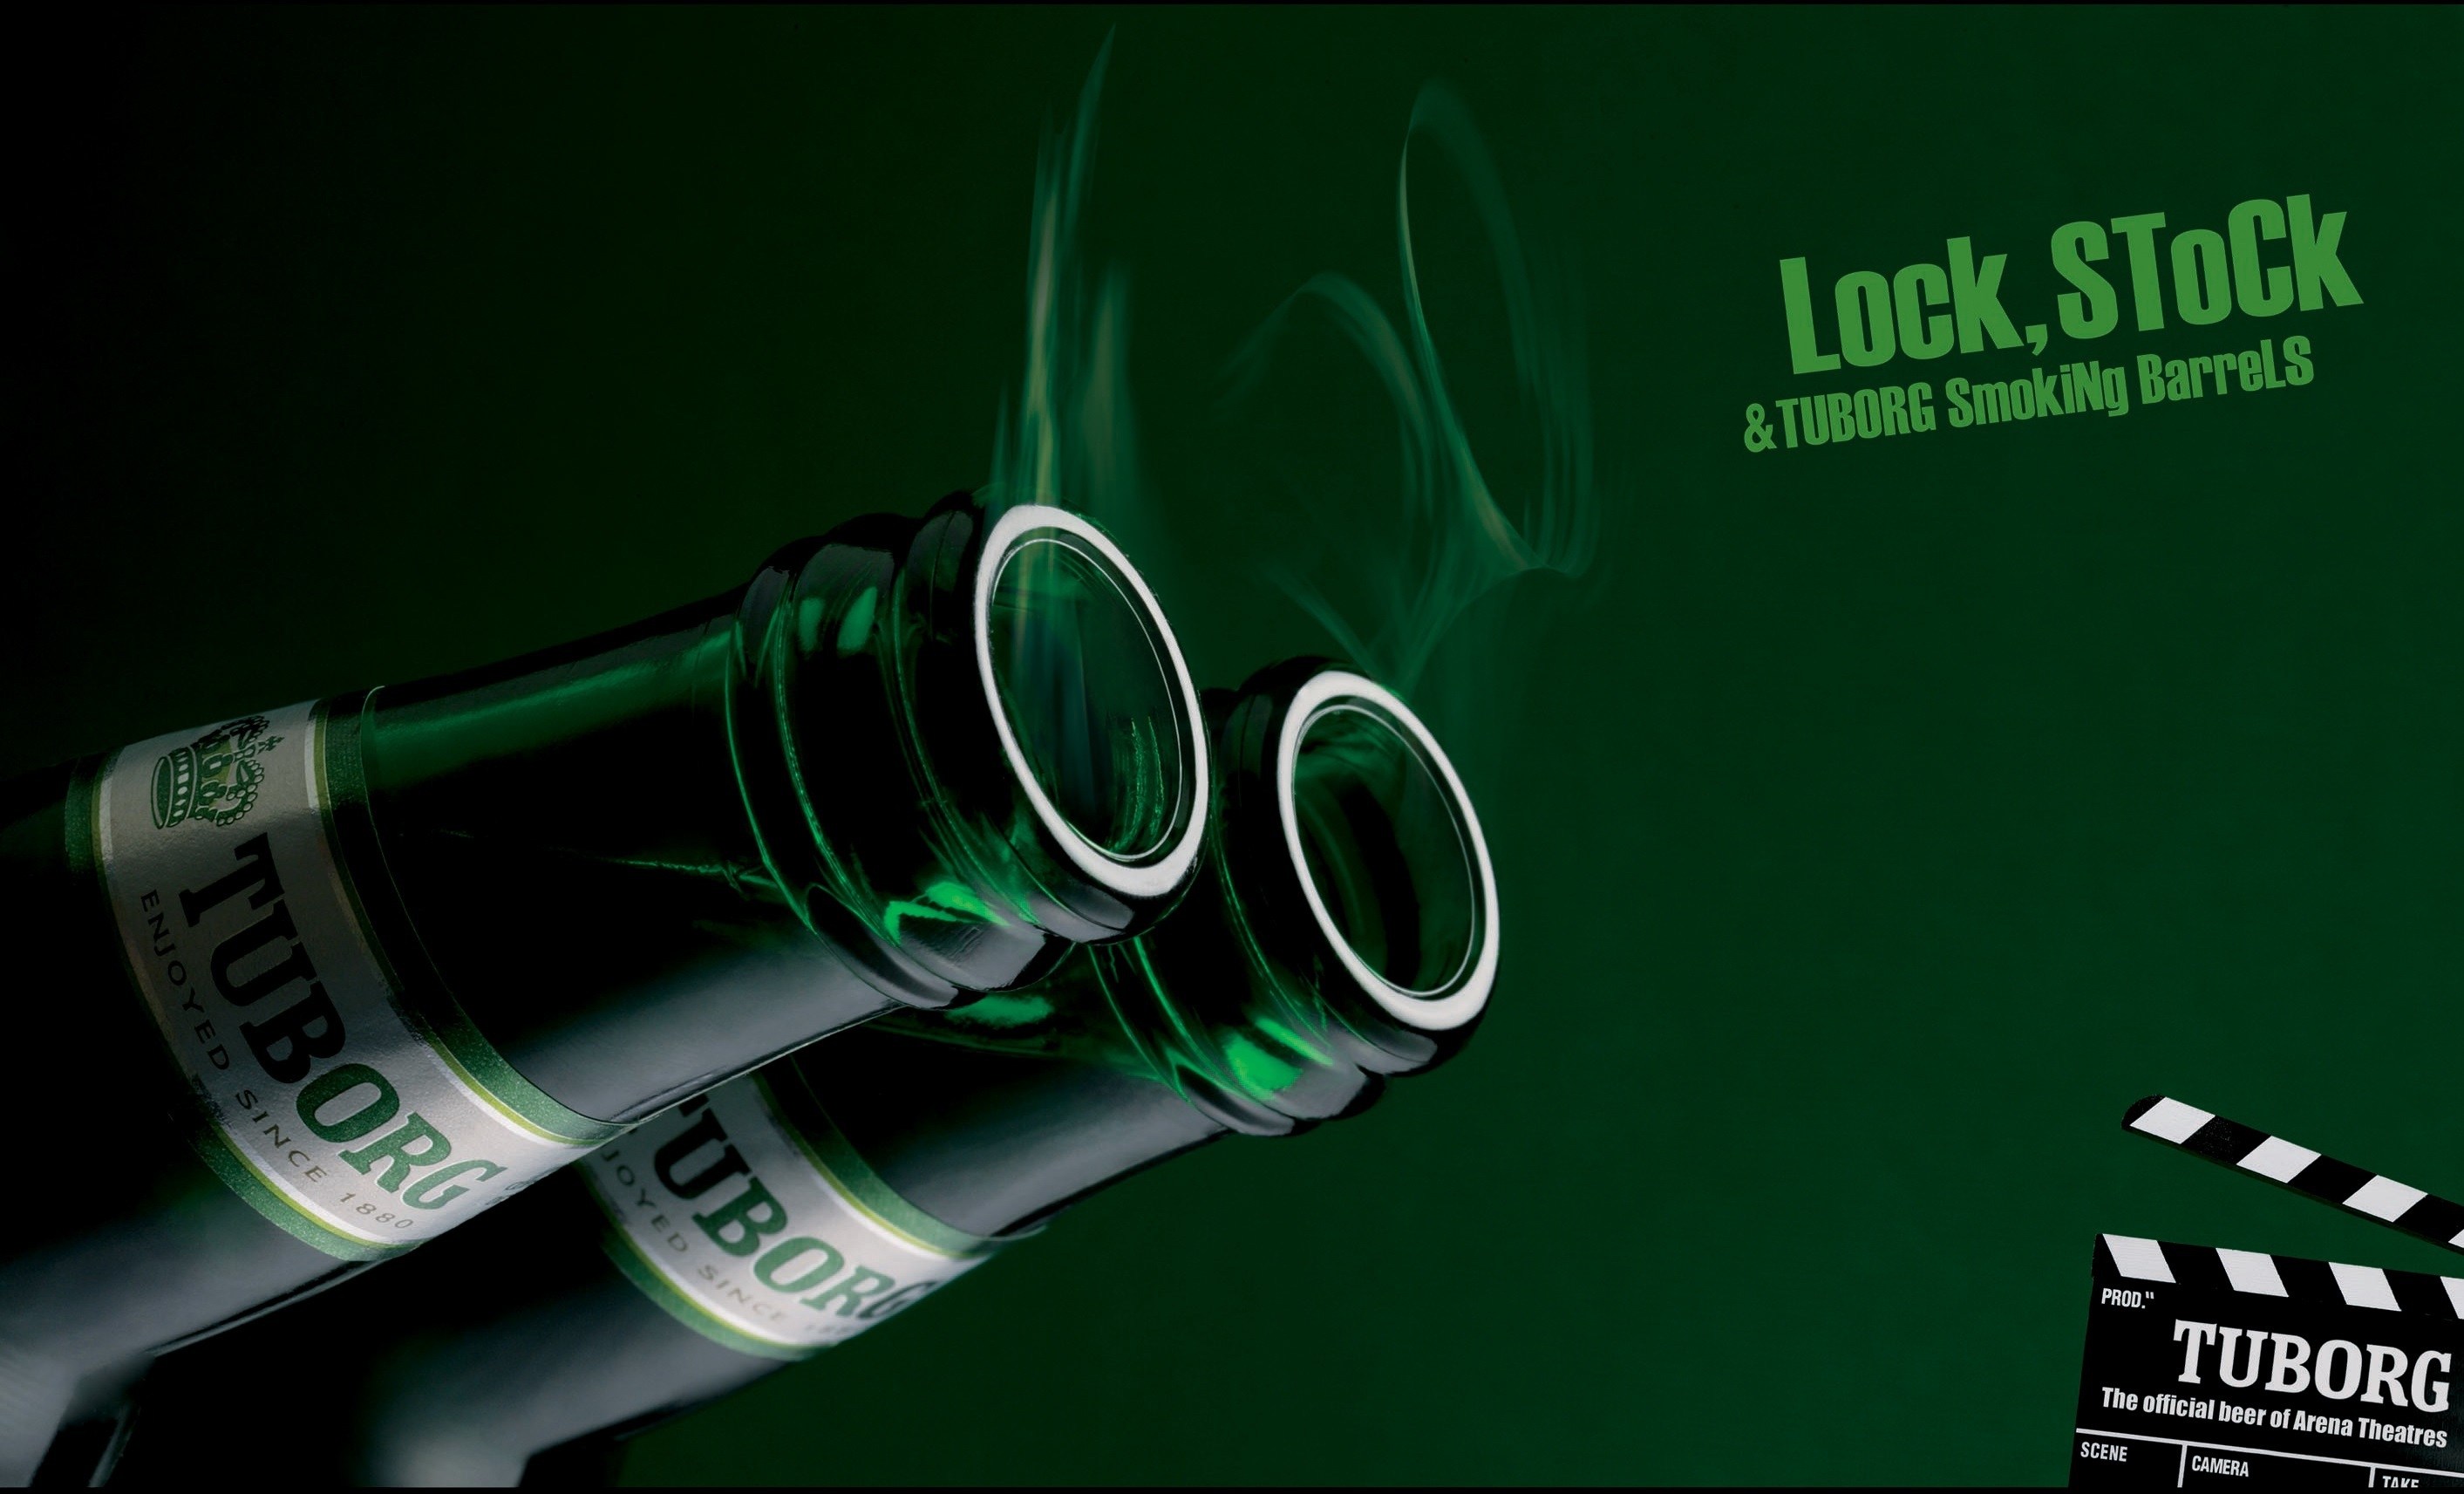 Carlsberg Wallpaper Image Photos Pictures Background